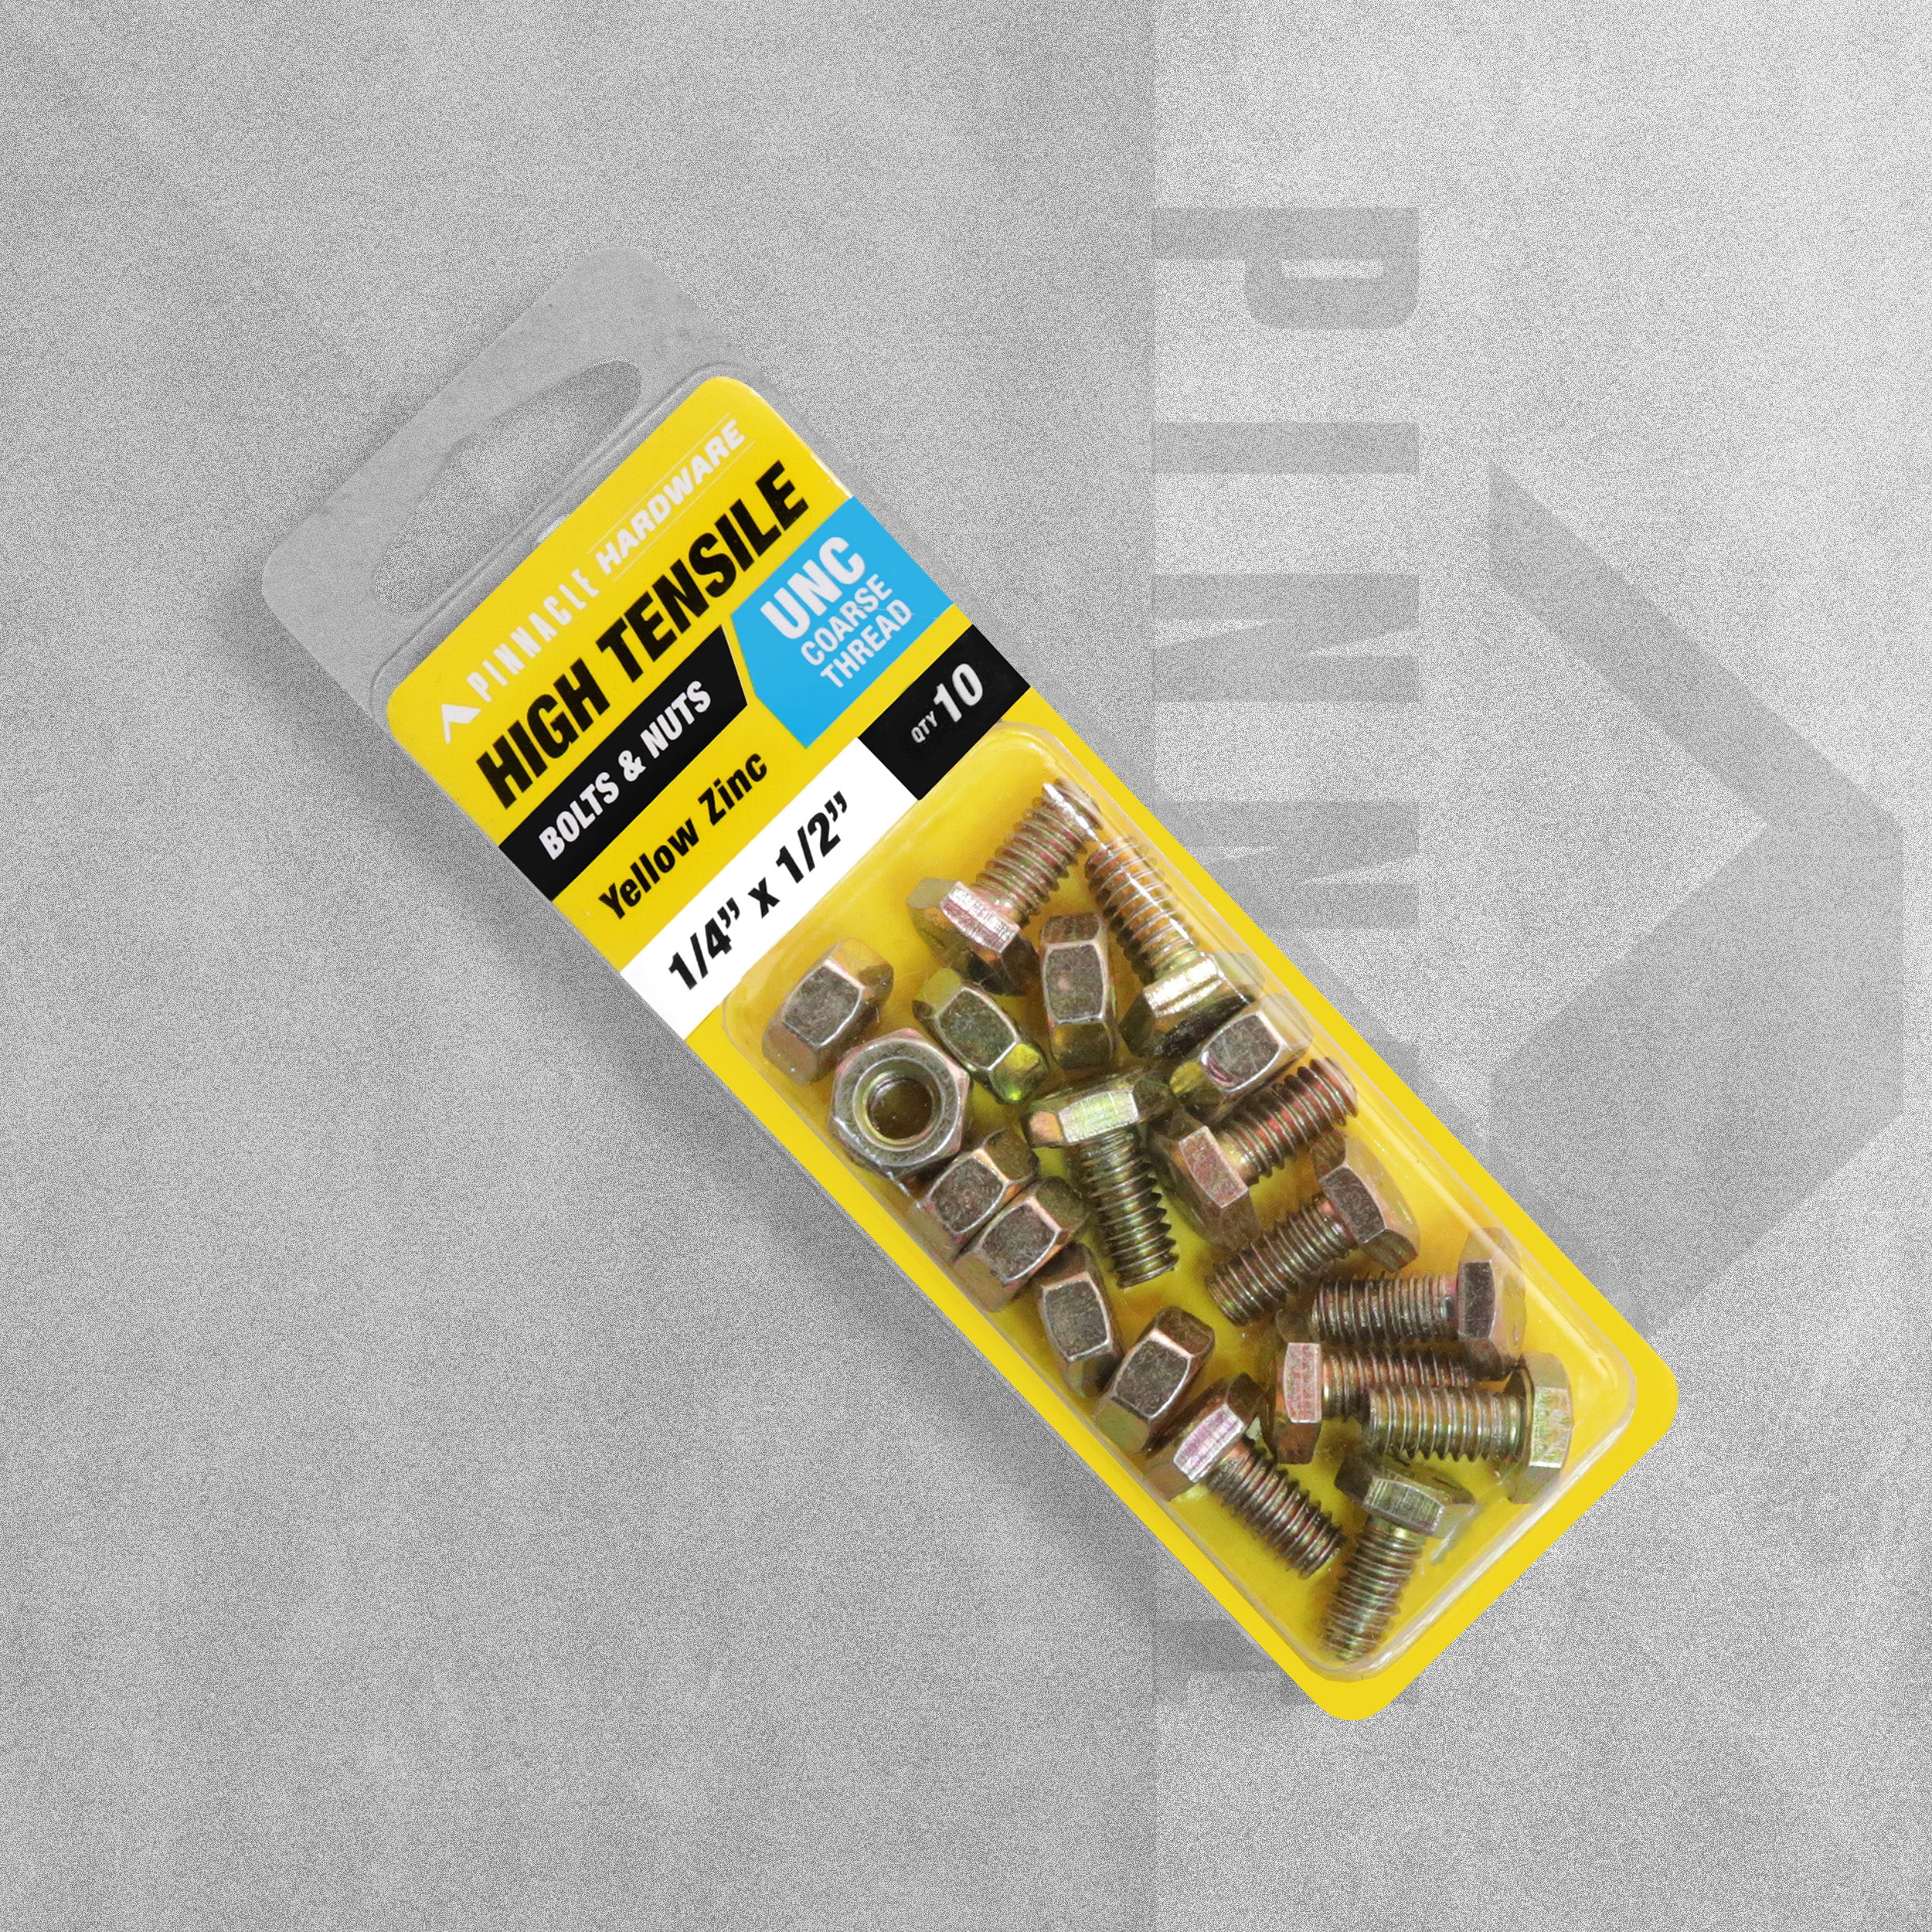 Sandleford Pinnacle Hardware - High Tensile Bolts & Nuts 1/4" x 1/2" Yellow Zinc - Pack of 10